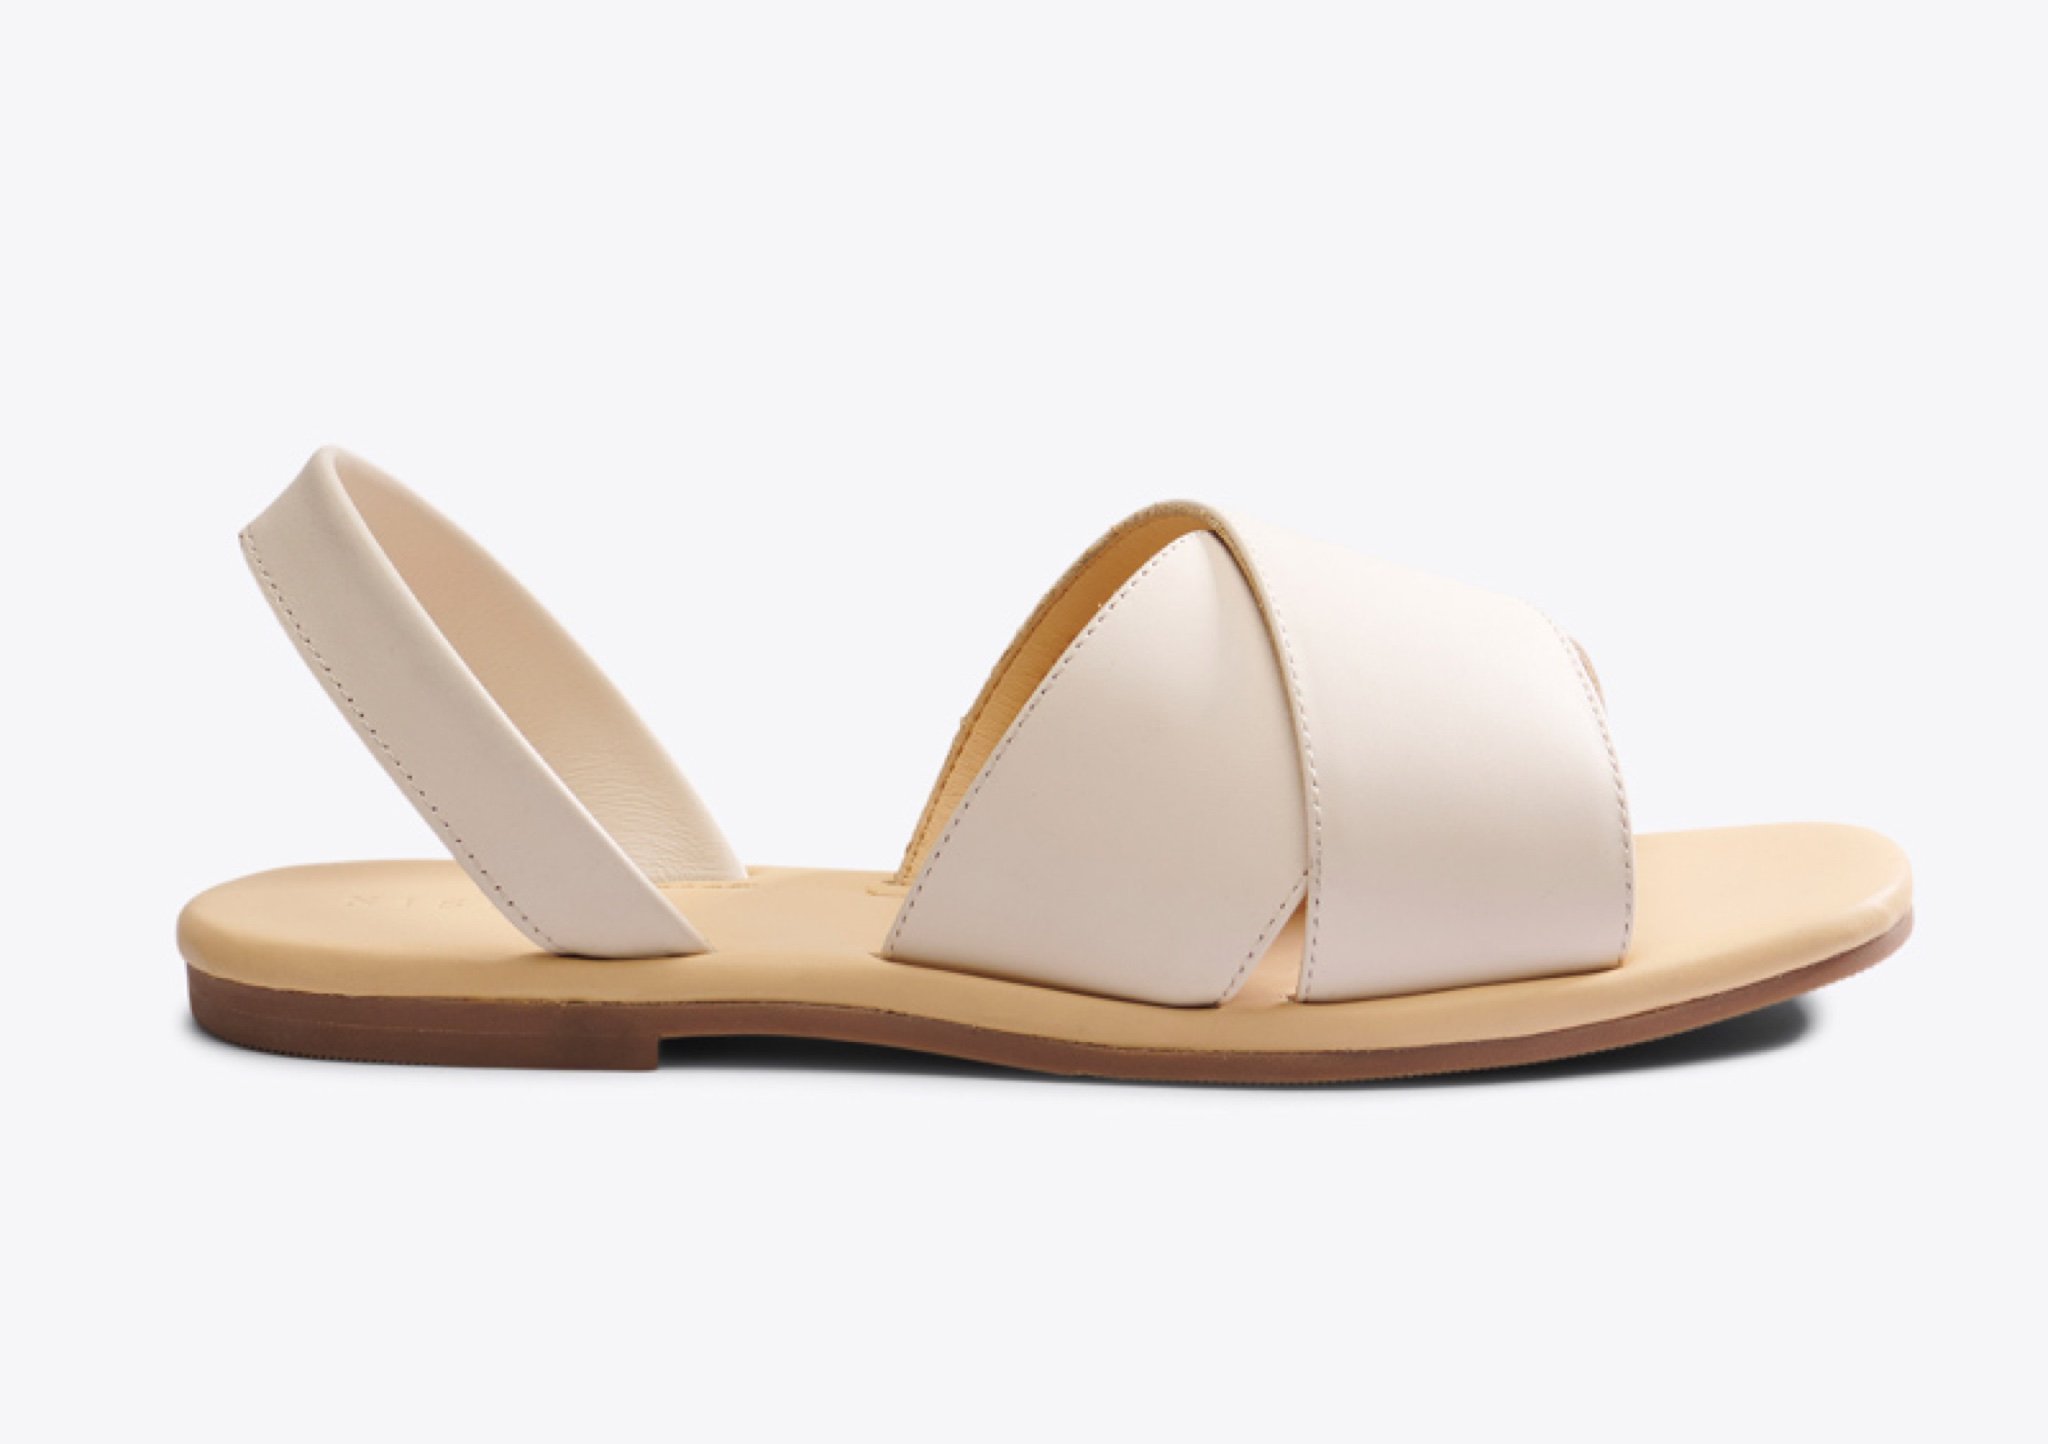 Nisolo All-Day Cross Strap Sandal Bone - Every Nisolo product is built on the foundation of comfort, function, and design. 